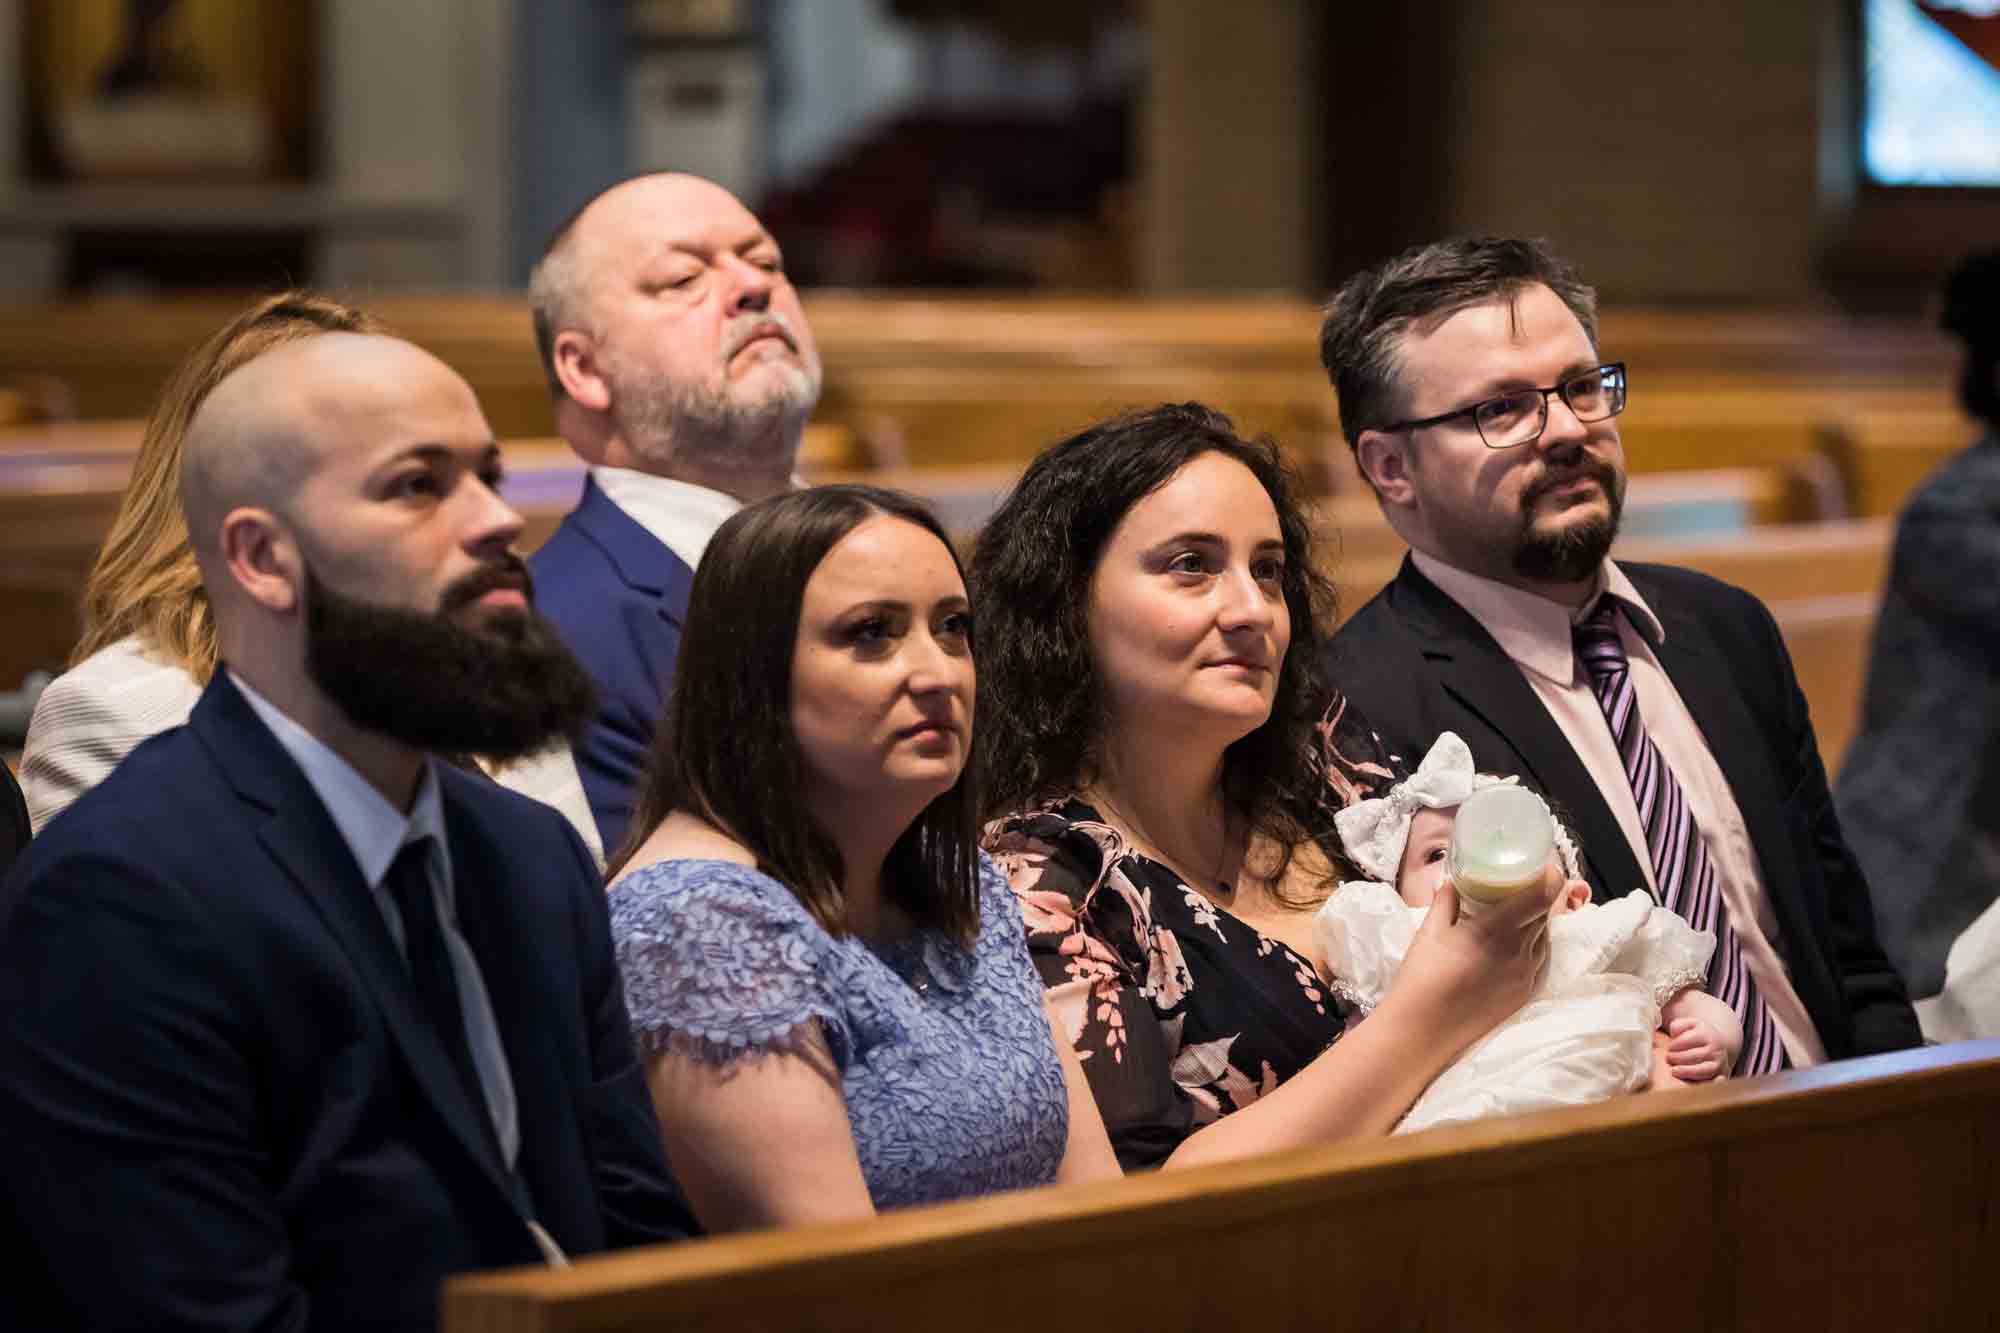 Maspeth baptism photos of family sitting in pew holding baby